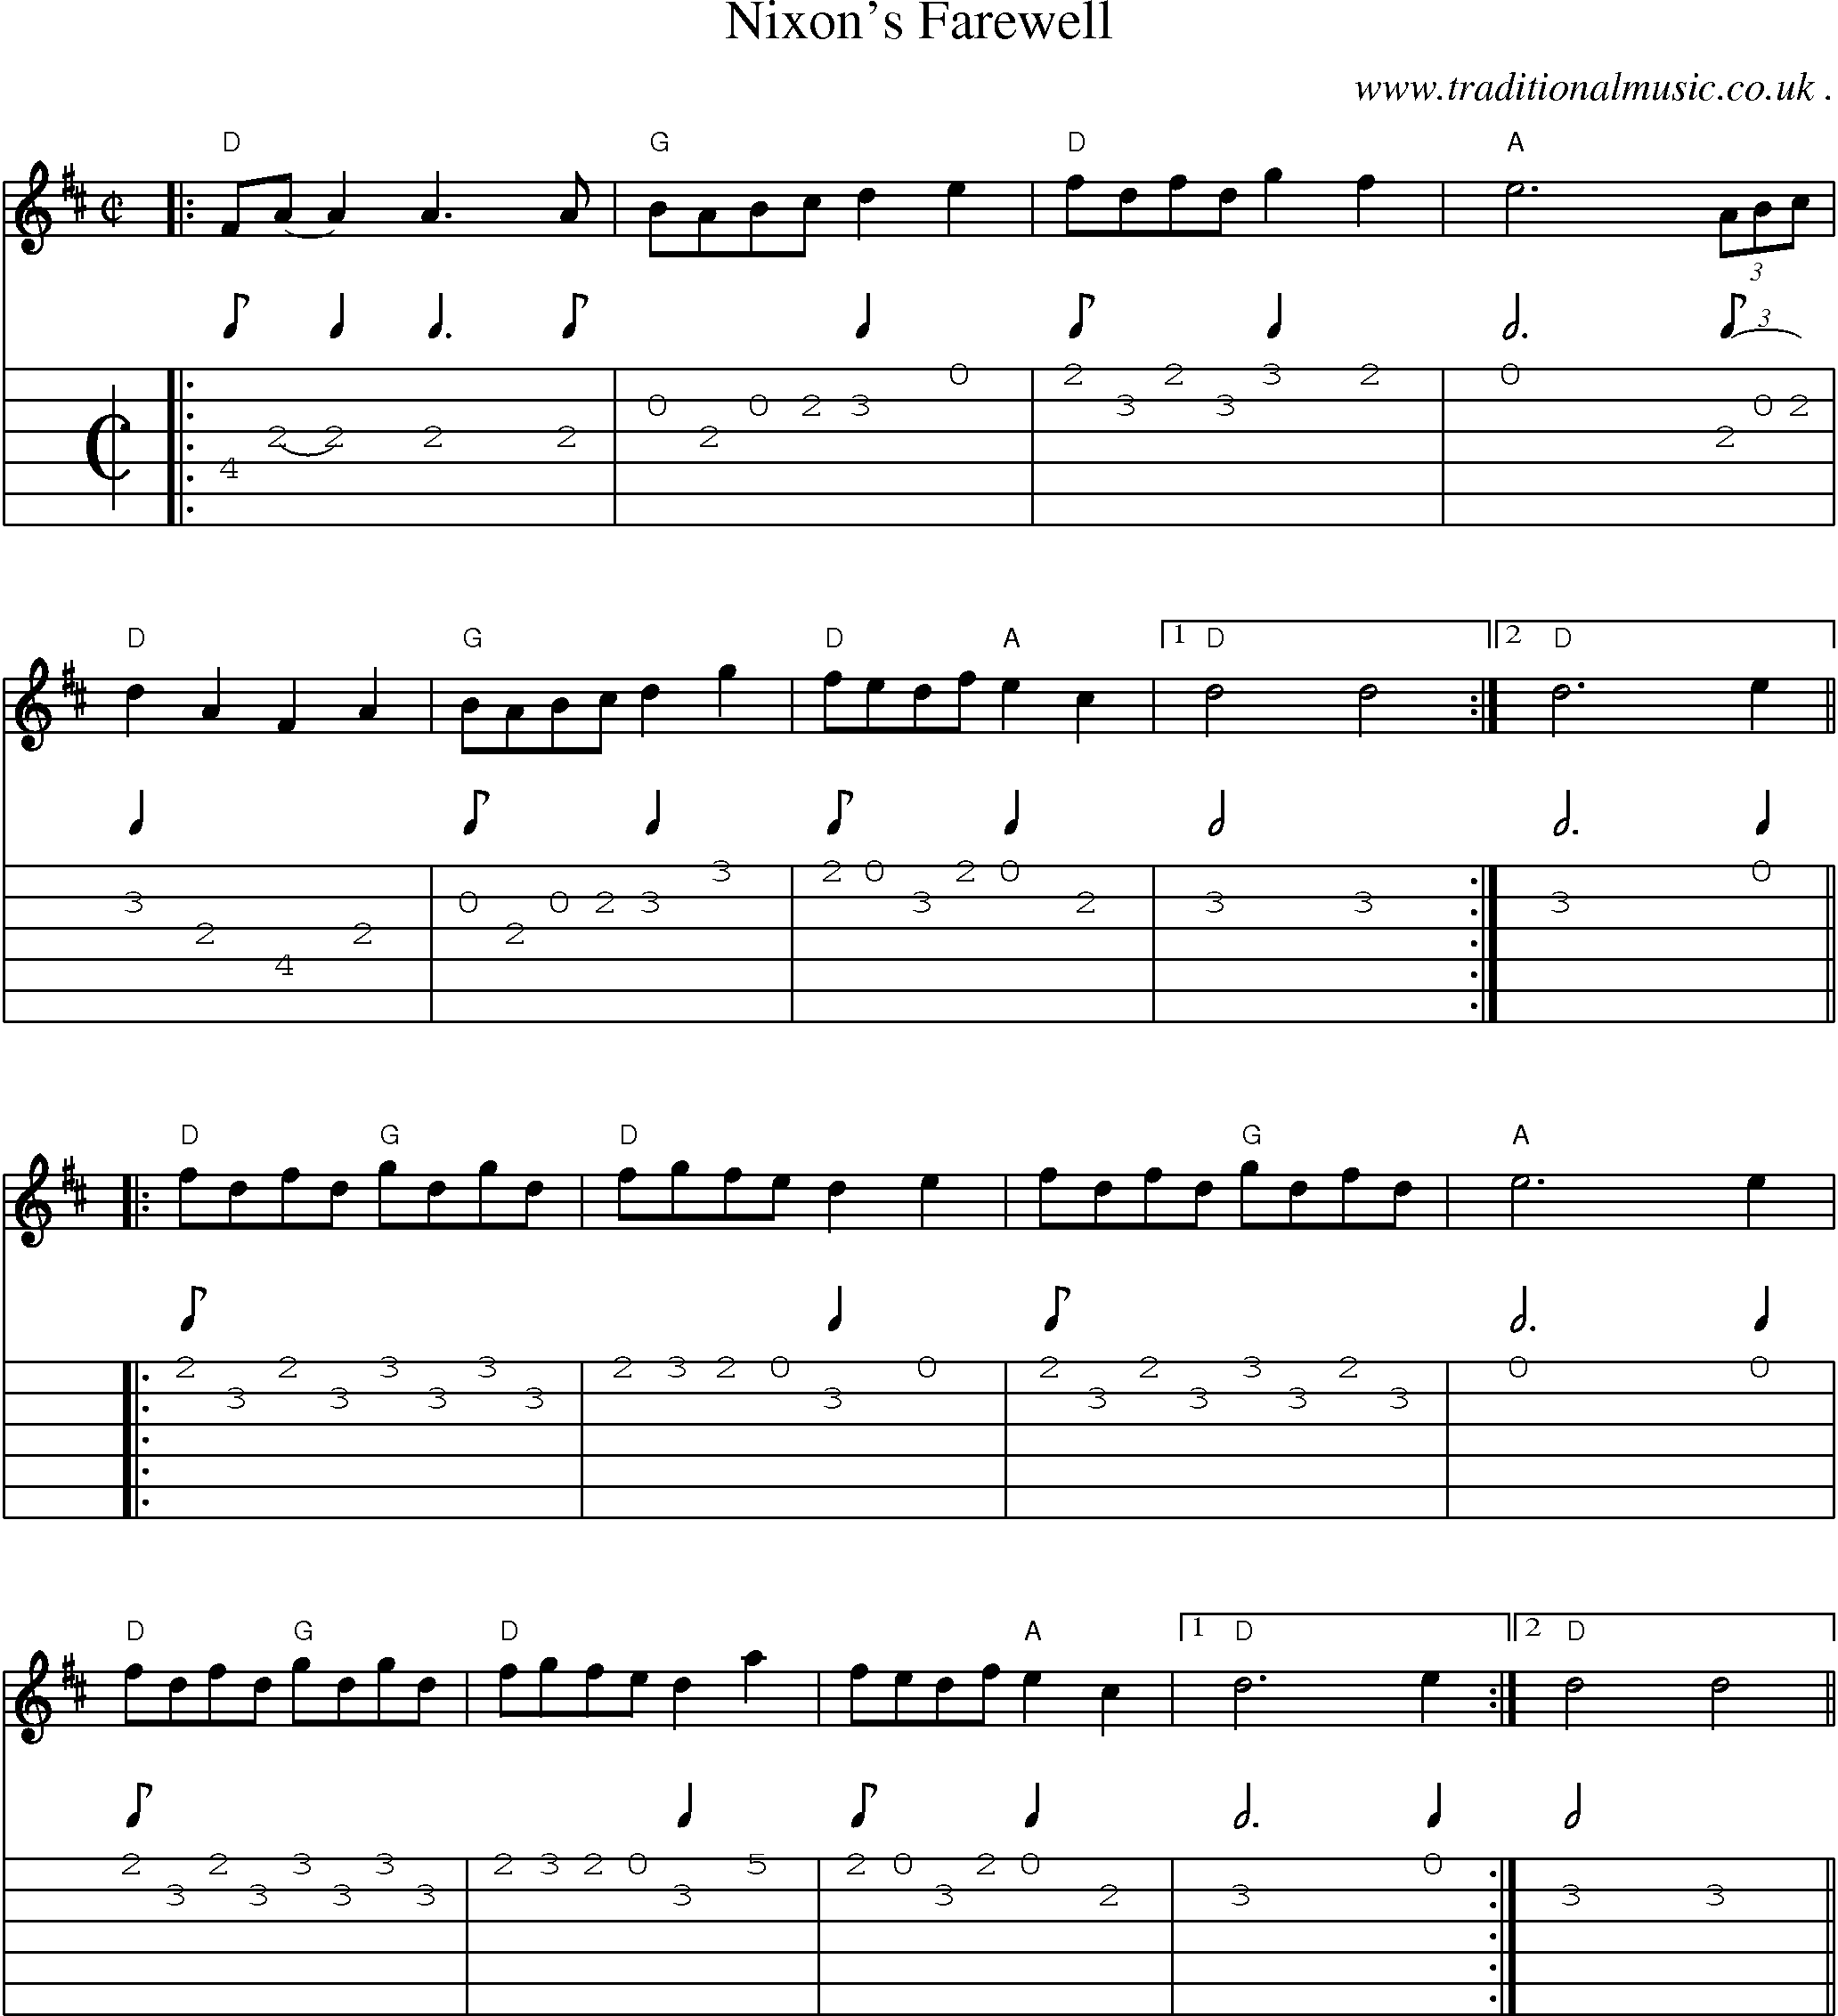 Music Score and Guitar Tabs for Nixons Farewell